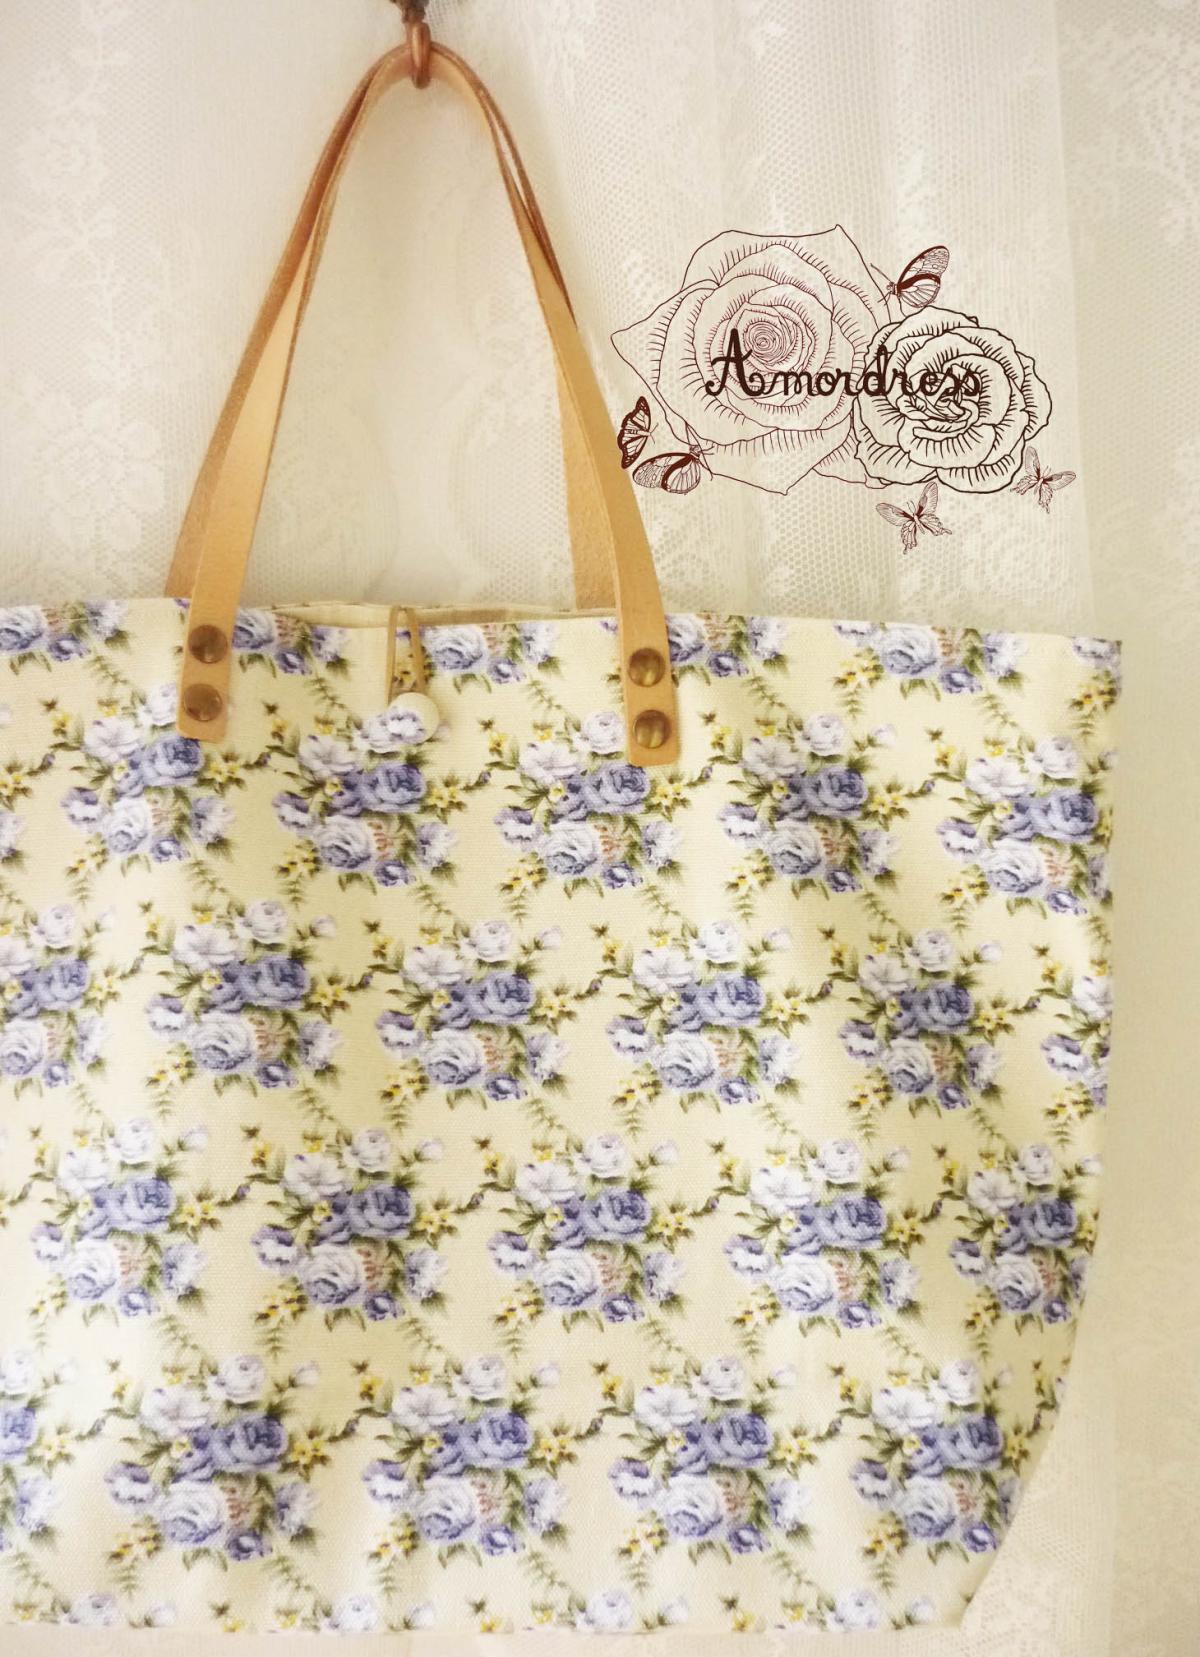 Floral Tote Bag Printed Canvas Bag Genuine Leather Strap Cream With Lavender Floral Shabby Chic Bag ...amor The Inspired Collection...